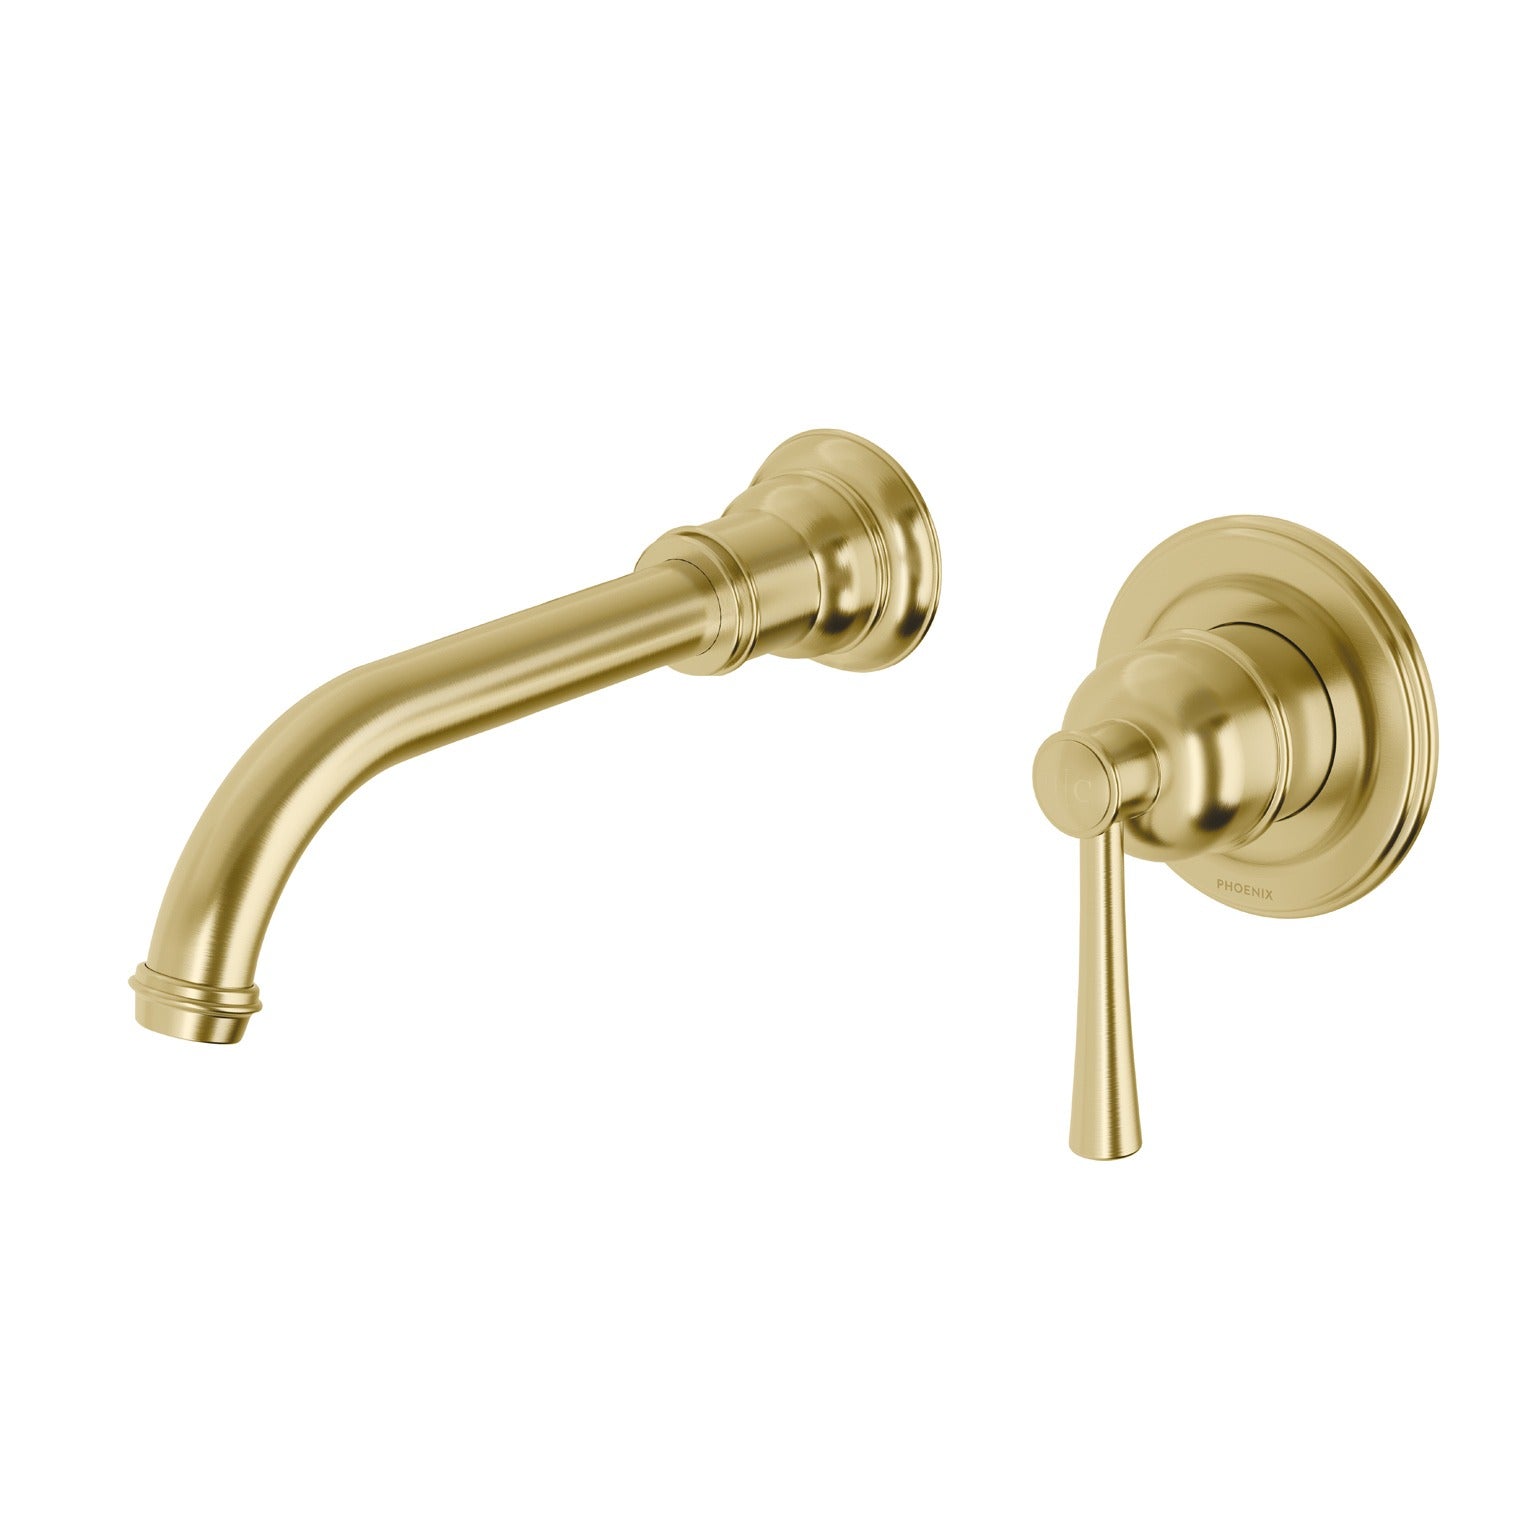 PHOENIX CROMFORD SWITCHMIX WALL BASIN MIXER SET FIT-OFF AND ROUGH-IN KIT 200MM BRUSHED GOLD